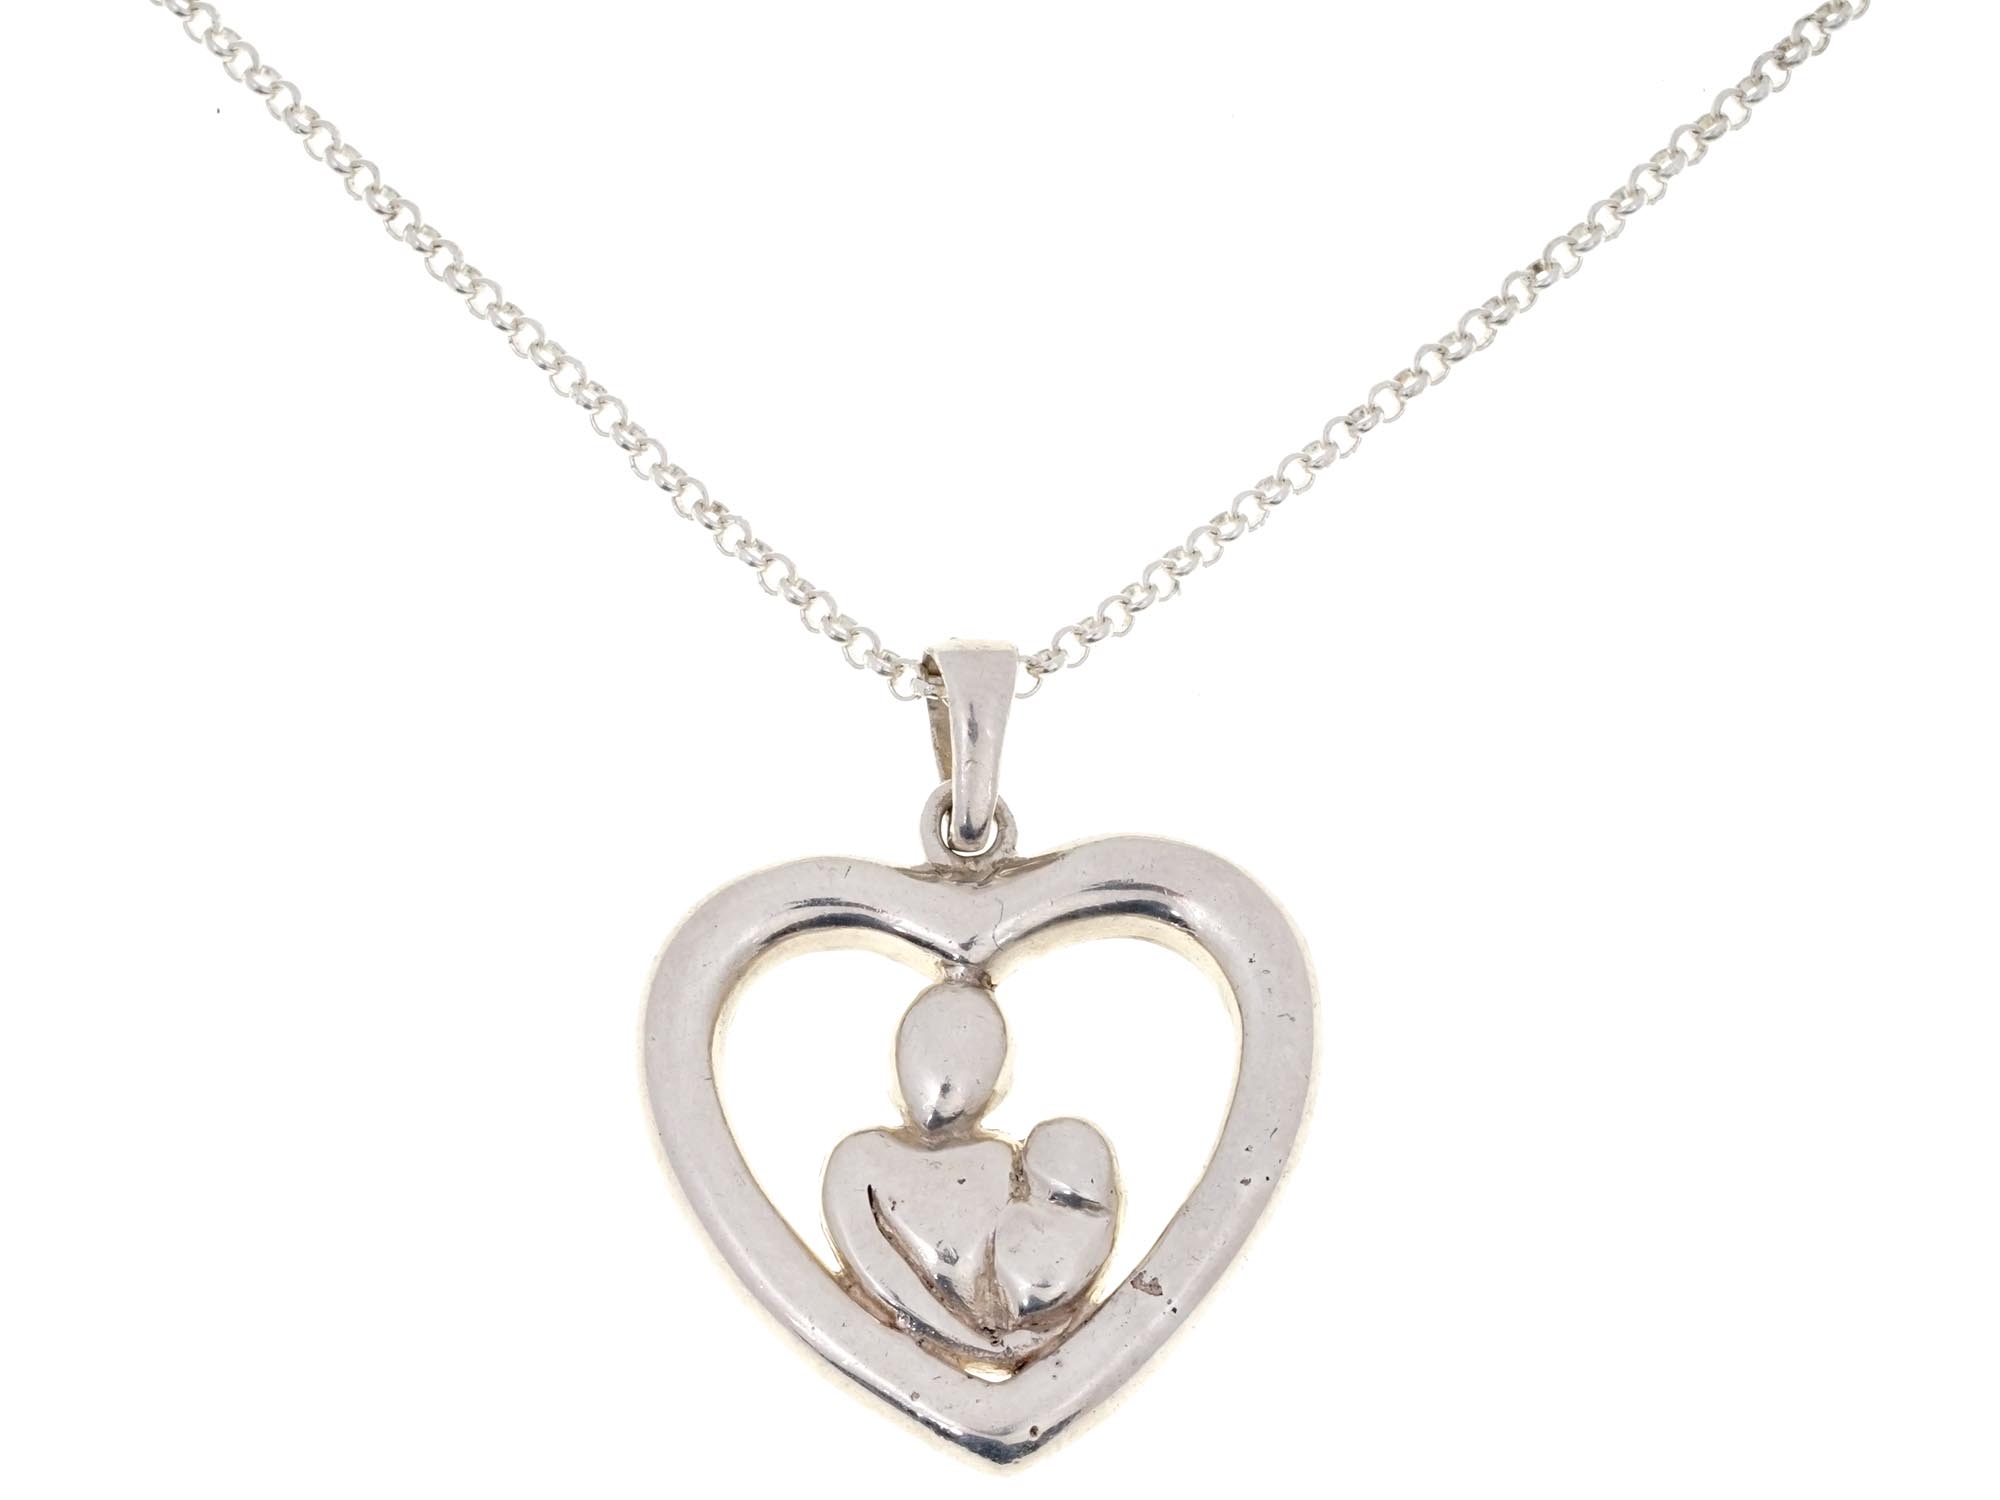 ITALIAN STERLING SILVER HEART PENDANT WITH CHAIN PIC-1